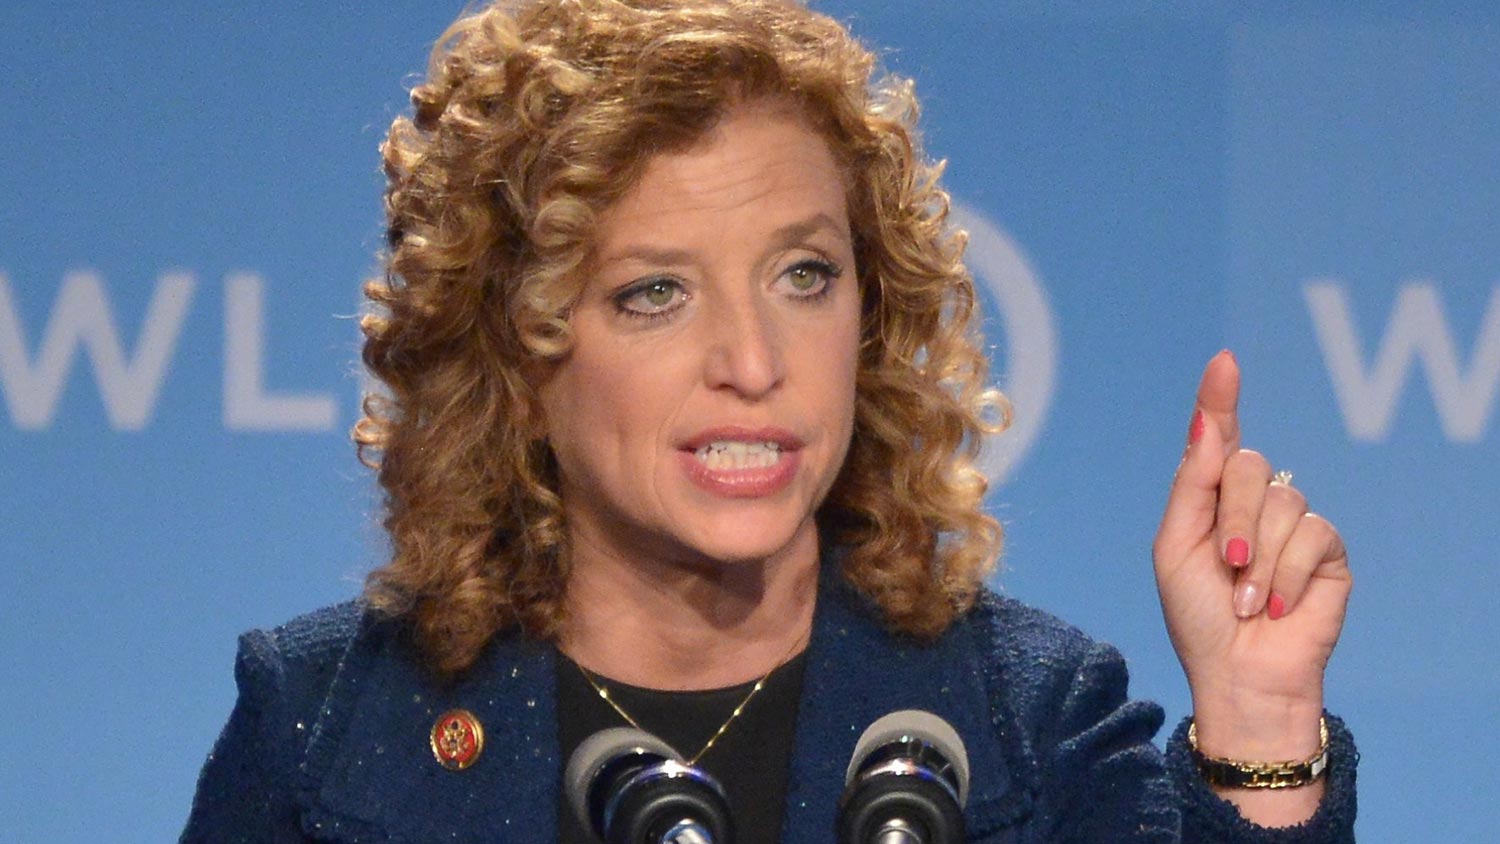 DNC Chairwoman Evades Questions About Obama